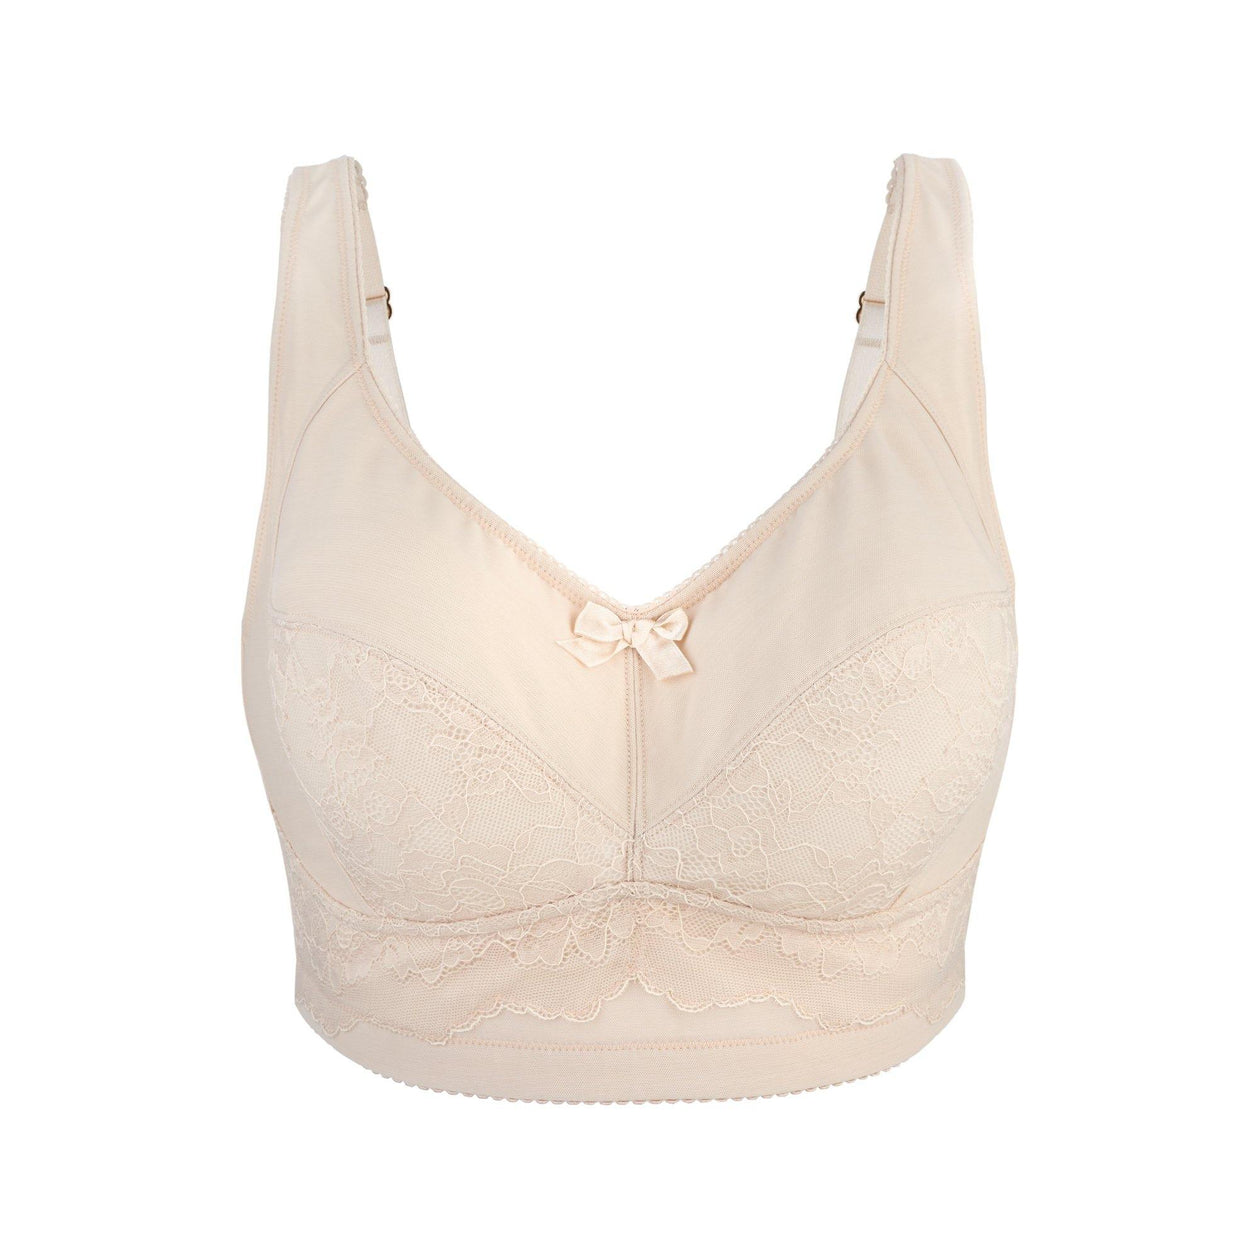 Ornate- Comfort Silk & Organic Cotton Non Wired Bra In Peach Pink, Juliemay Lingerie